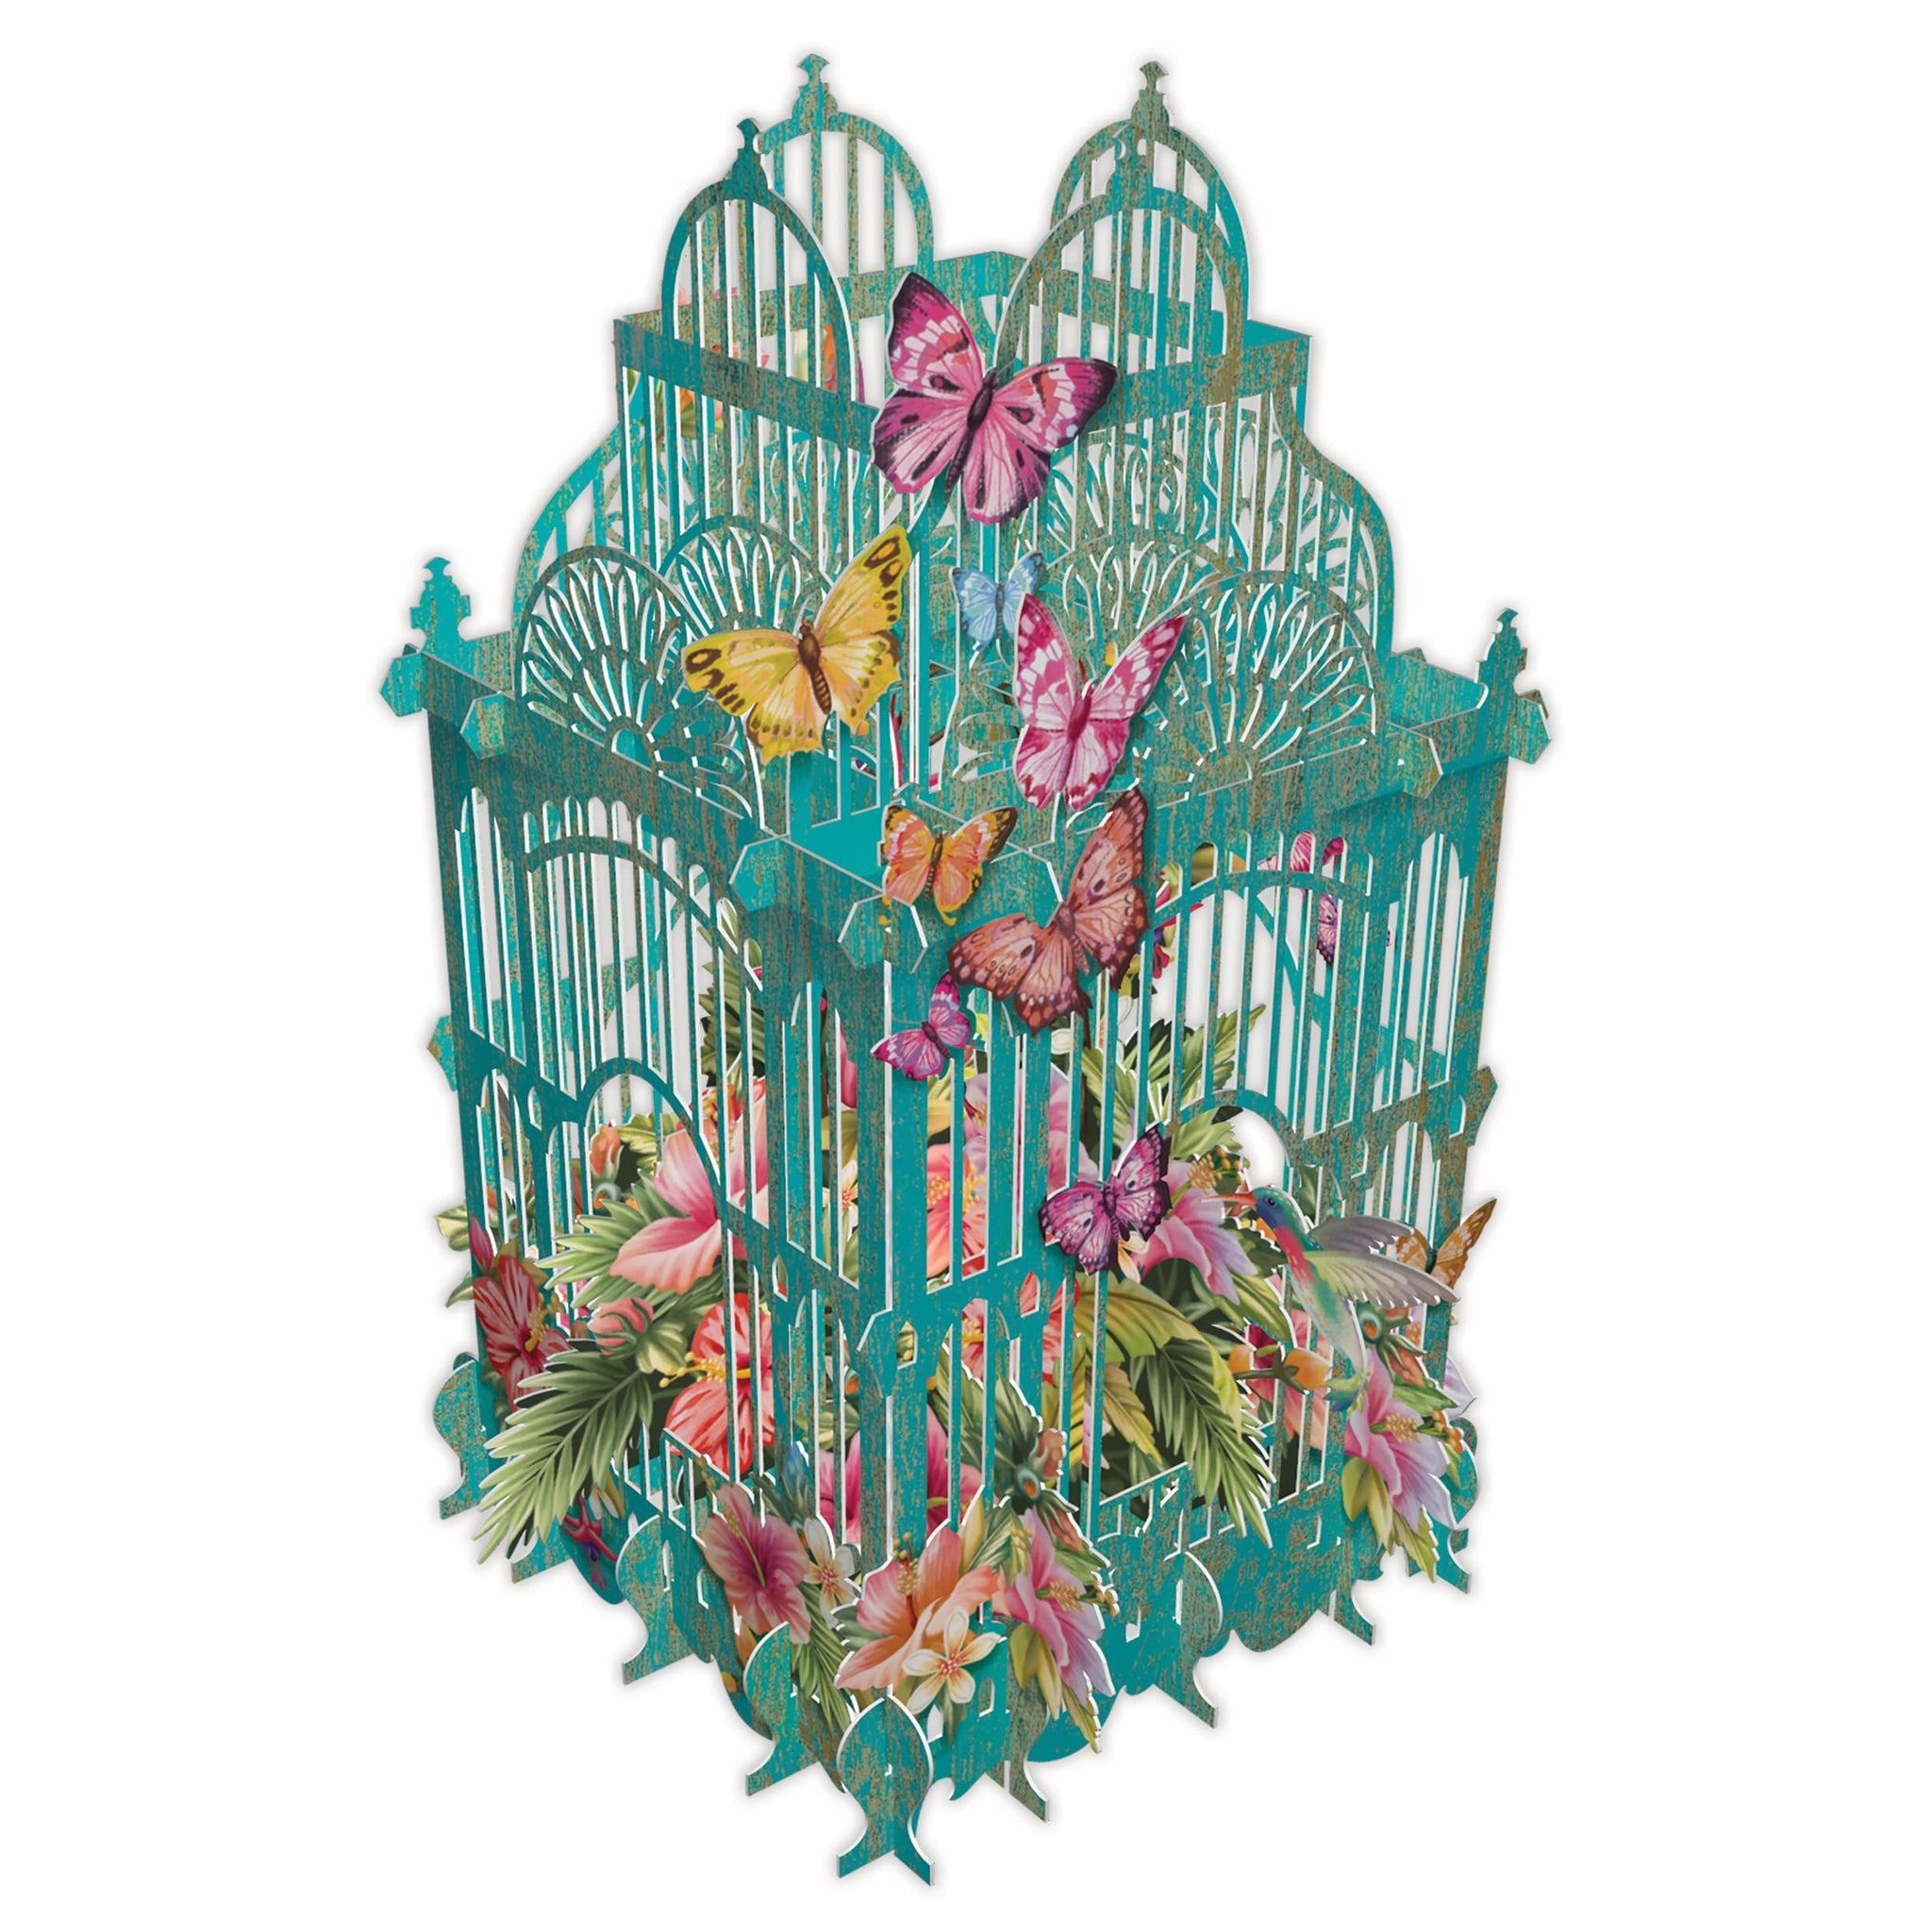 The Tropical Cage 3D Pop Up Card